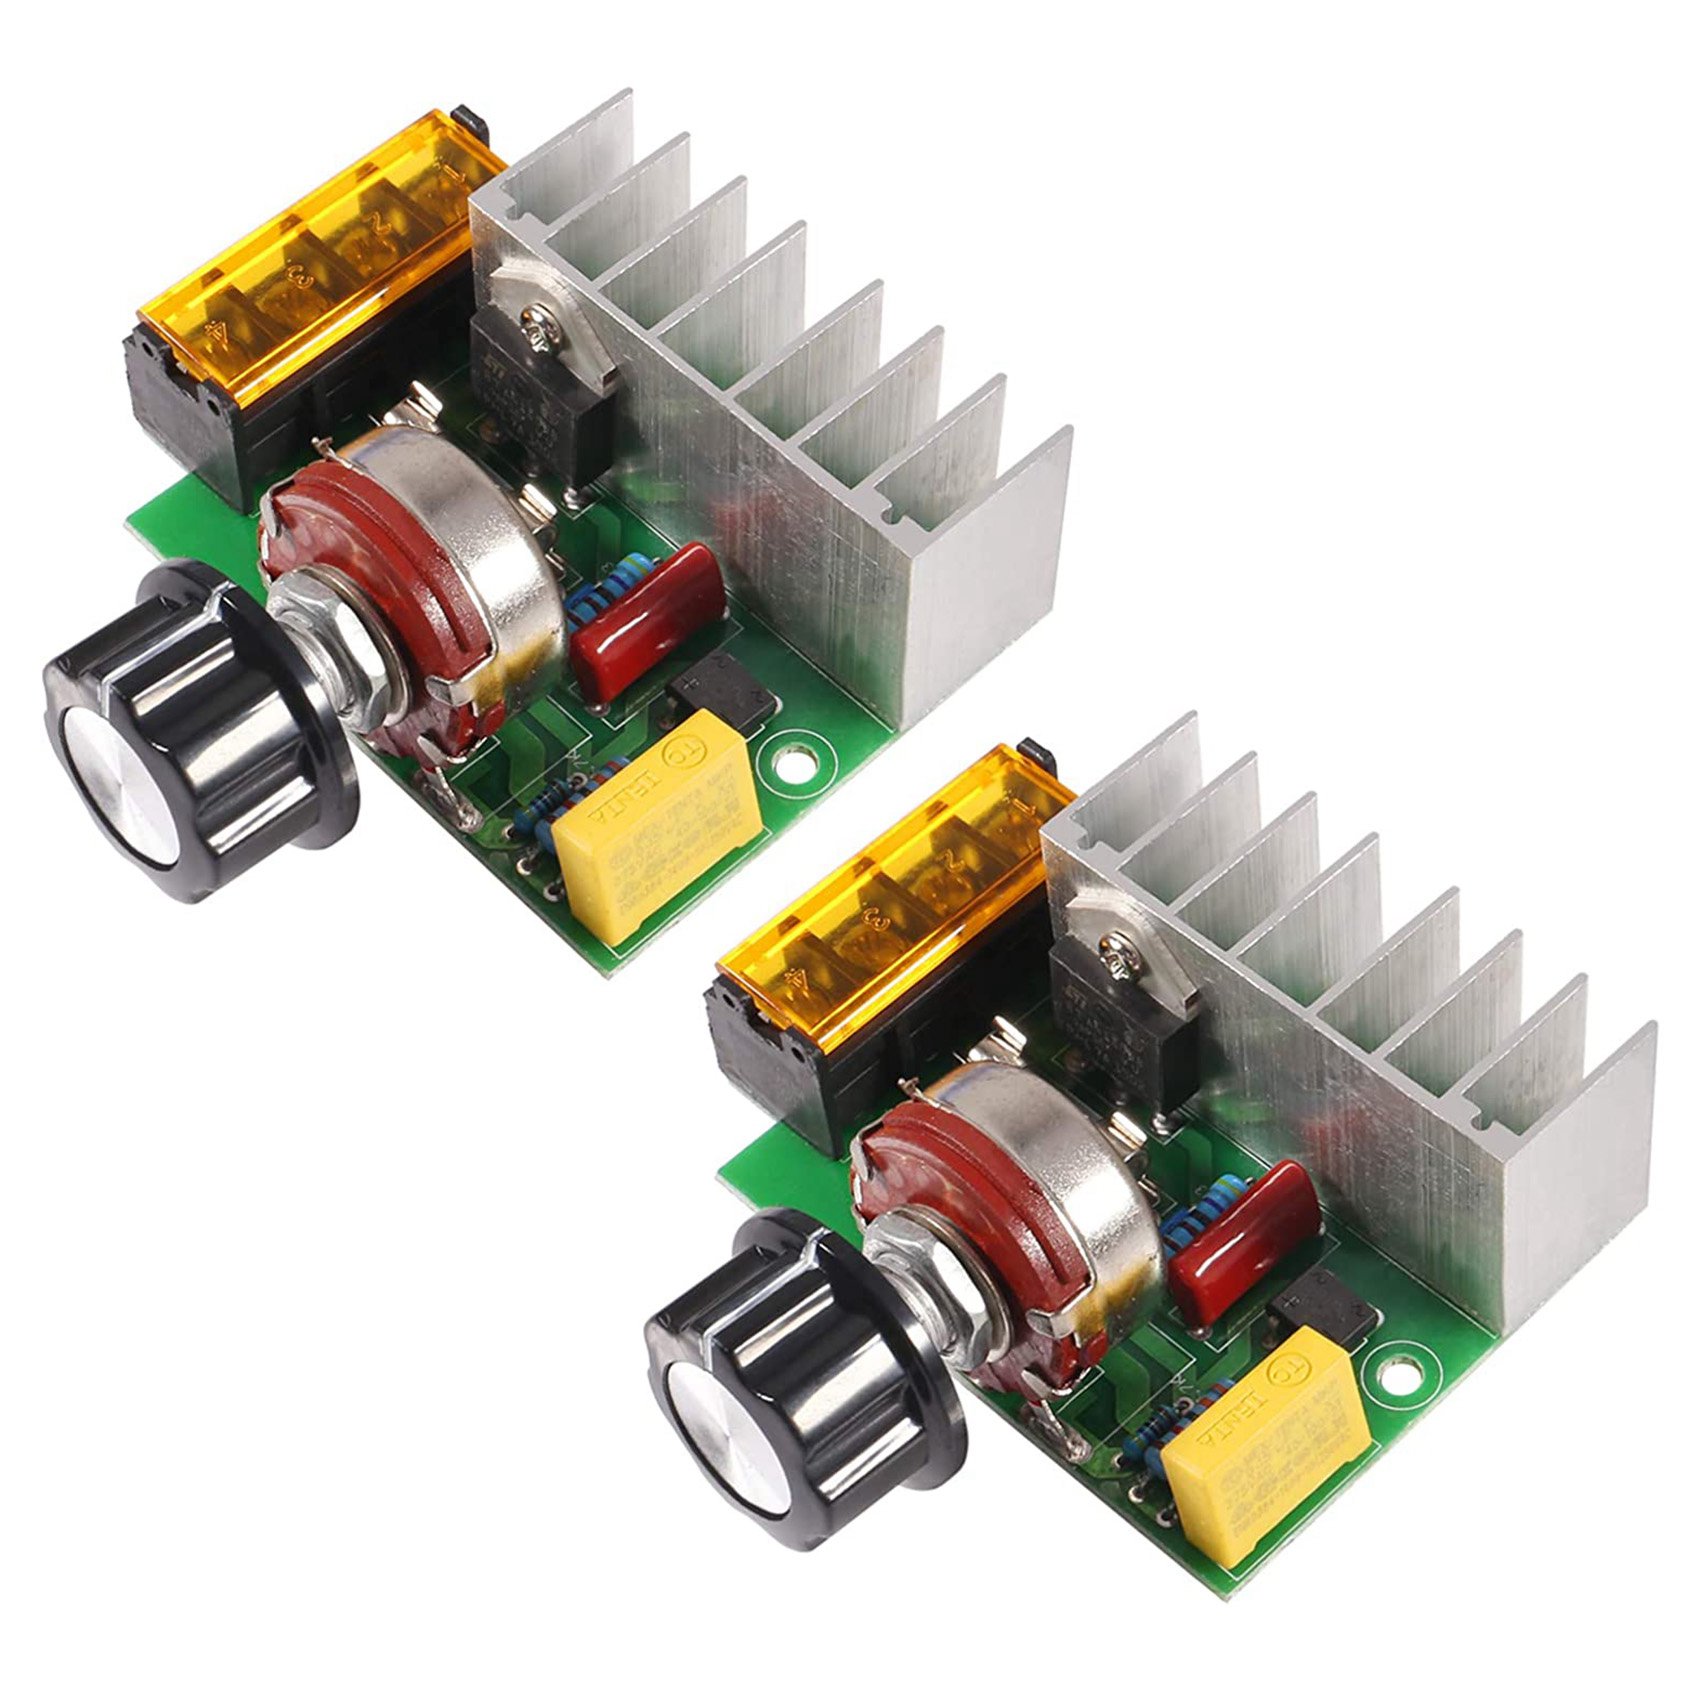 2 Pcs 4000W AC 220V Electric Voltage Motor Speed Controller Dimmers Dimming Speed with Fuse - Walmart.com